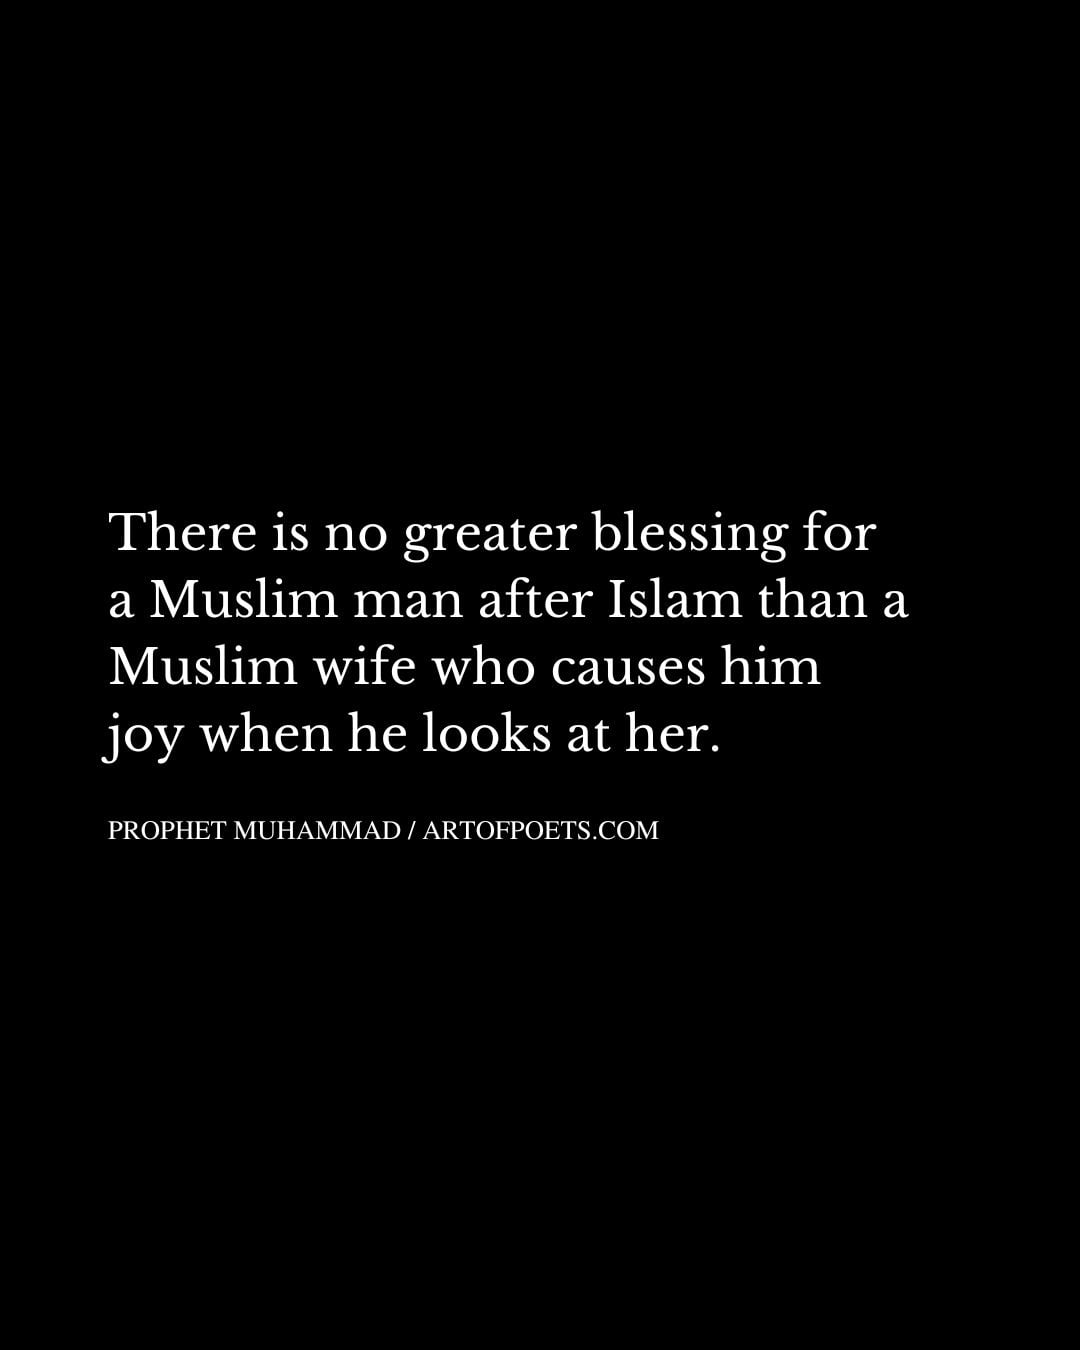 There is no greater blessing for a Muslim man after Islam than a Muslim wife who causes him joy when he looks at her